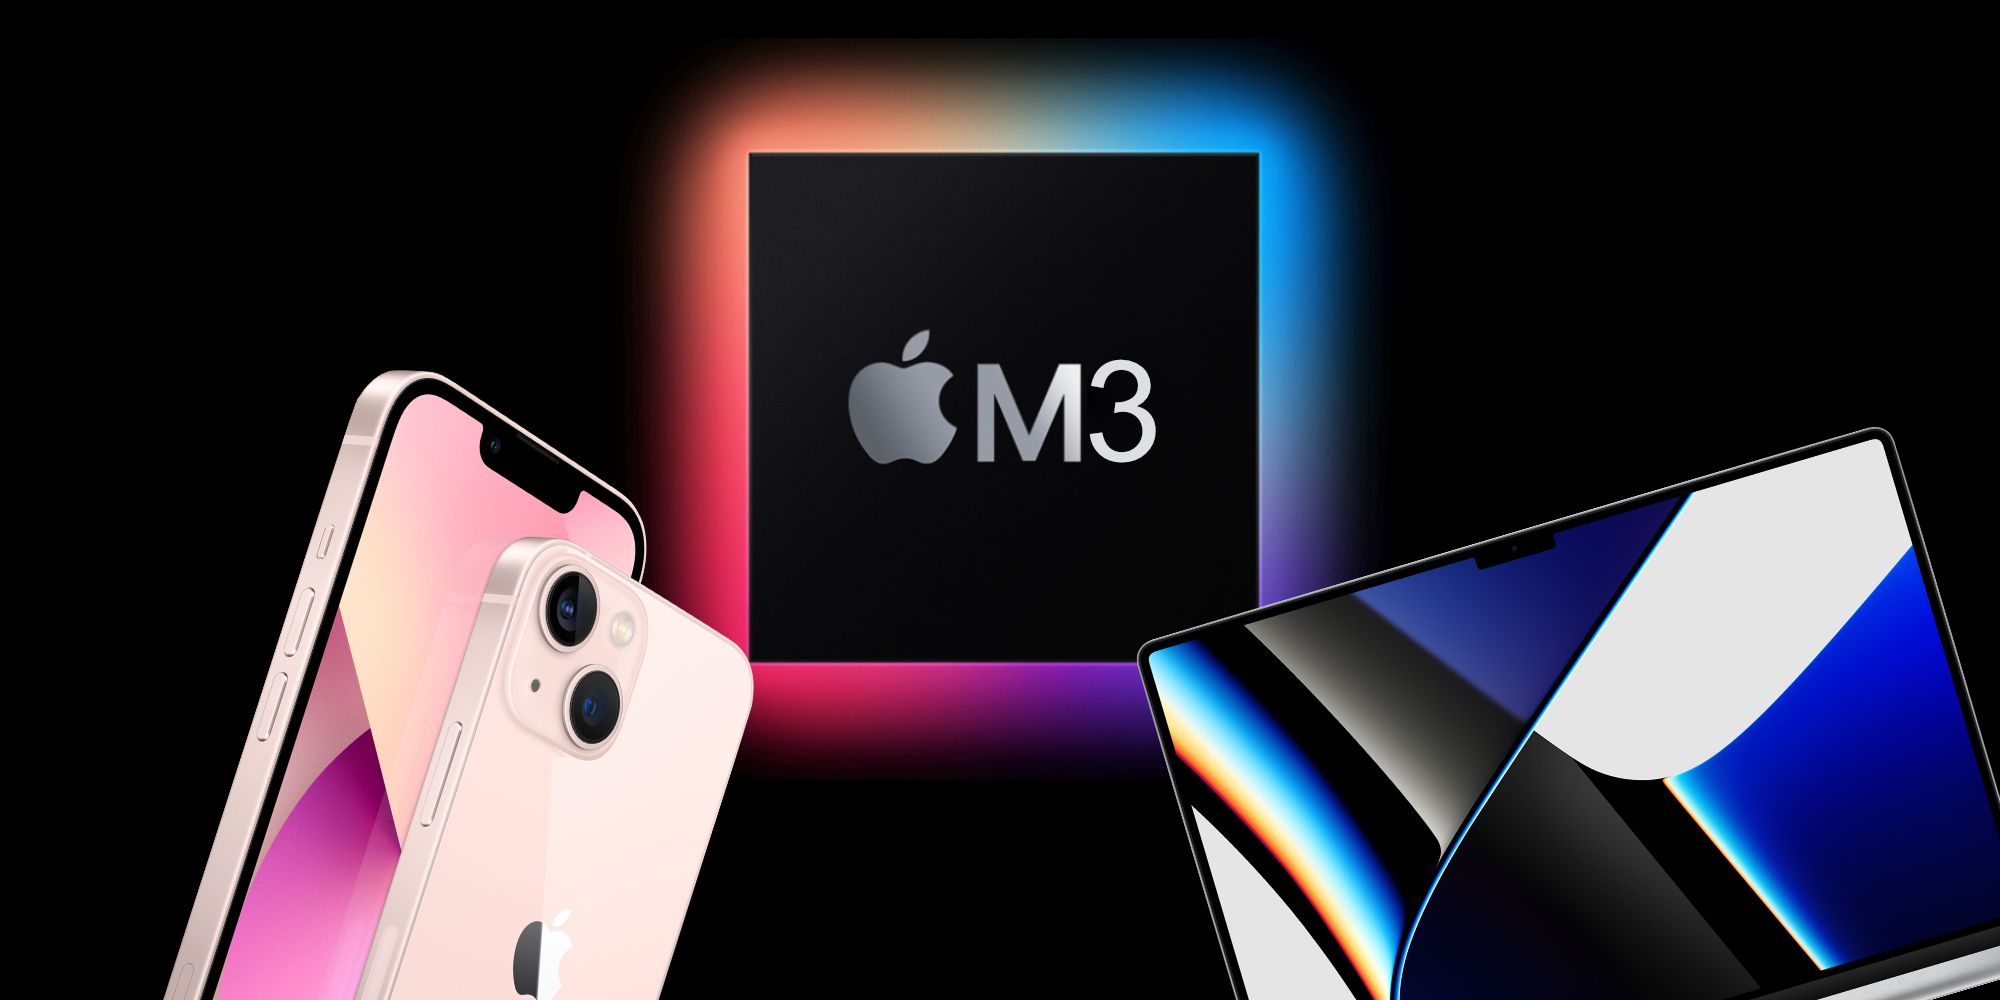 Future Apple 'M3' chip next to an iPhone and MacBook